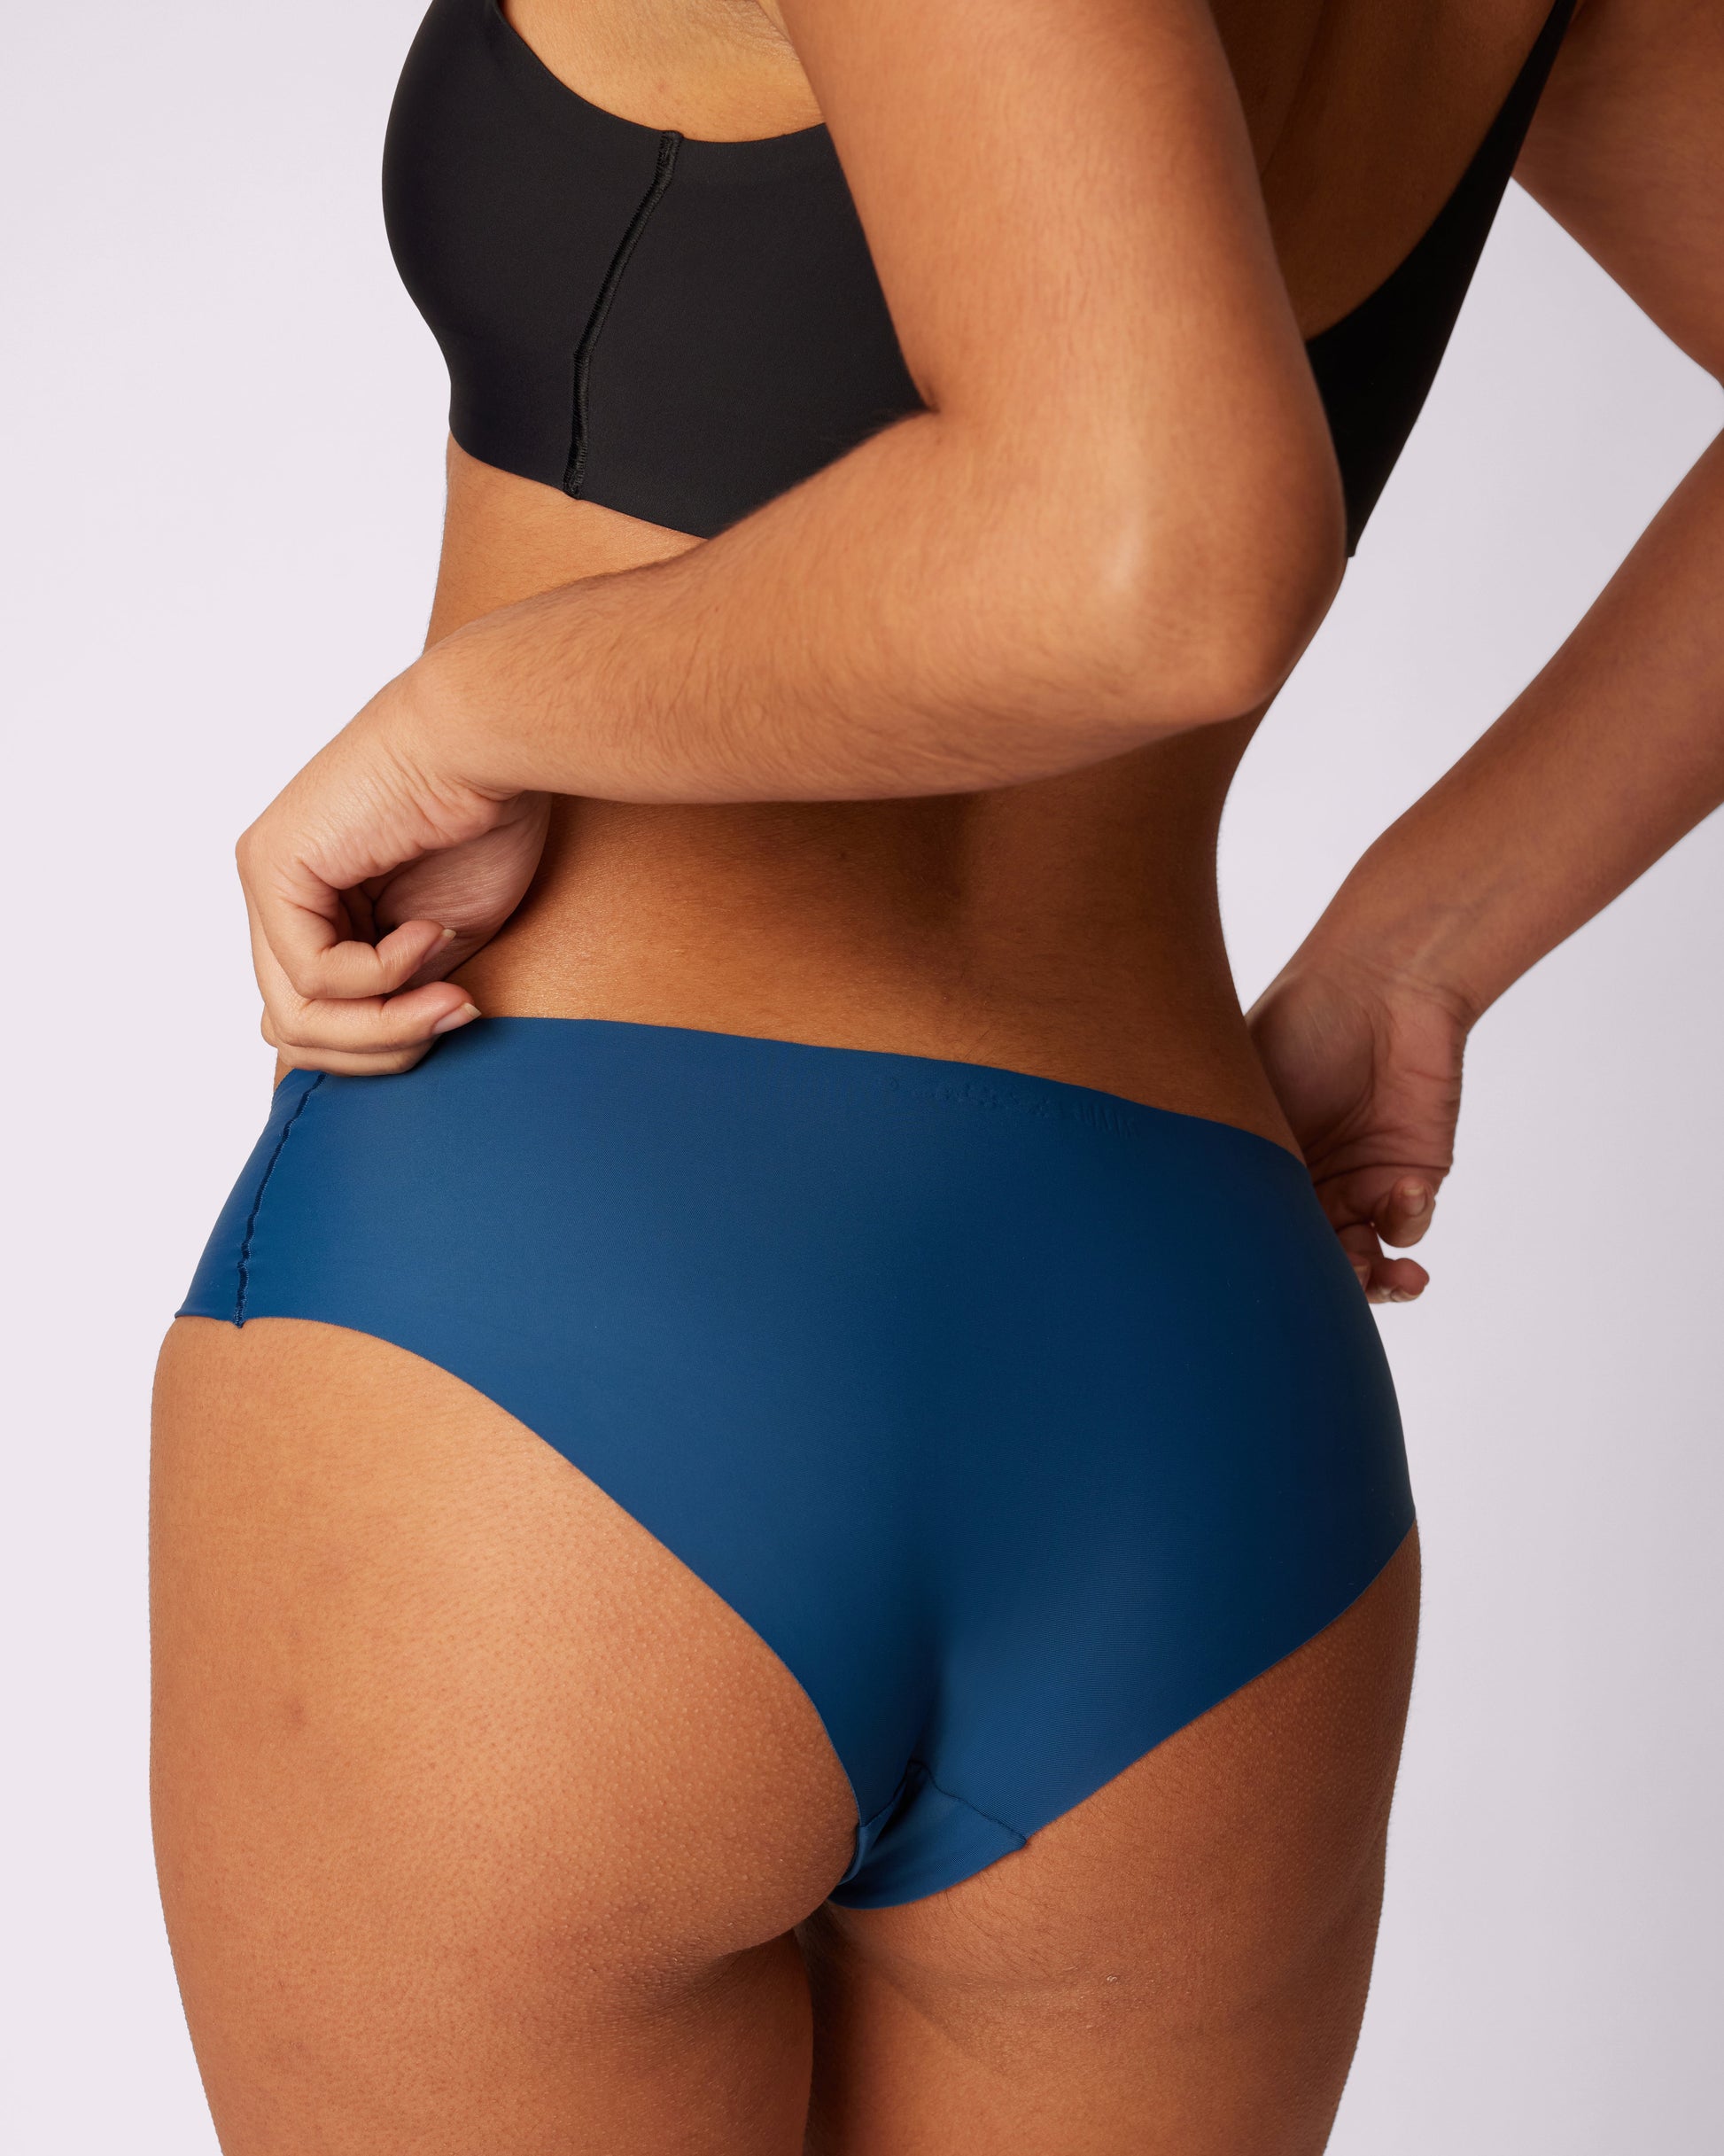 KNIX Super Leakproof Boyshort - Period and Incontinence Underwear